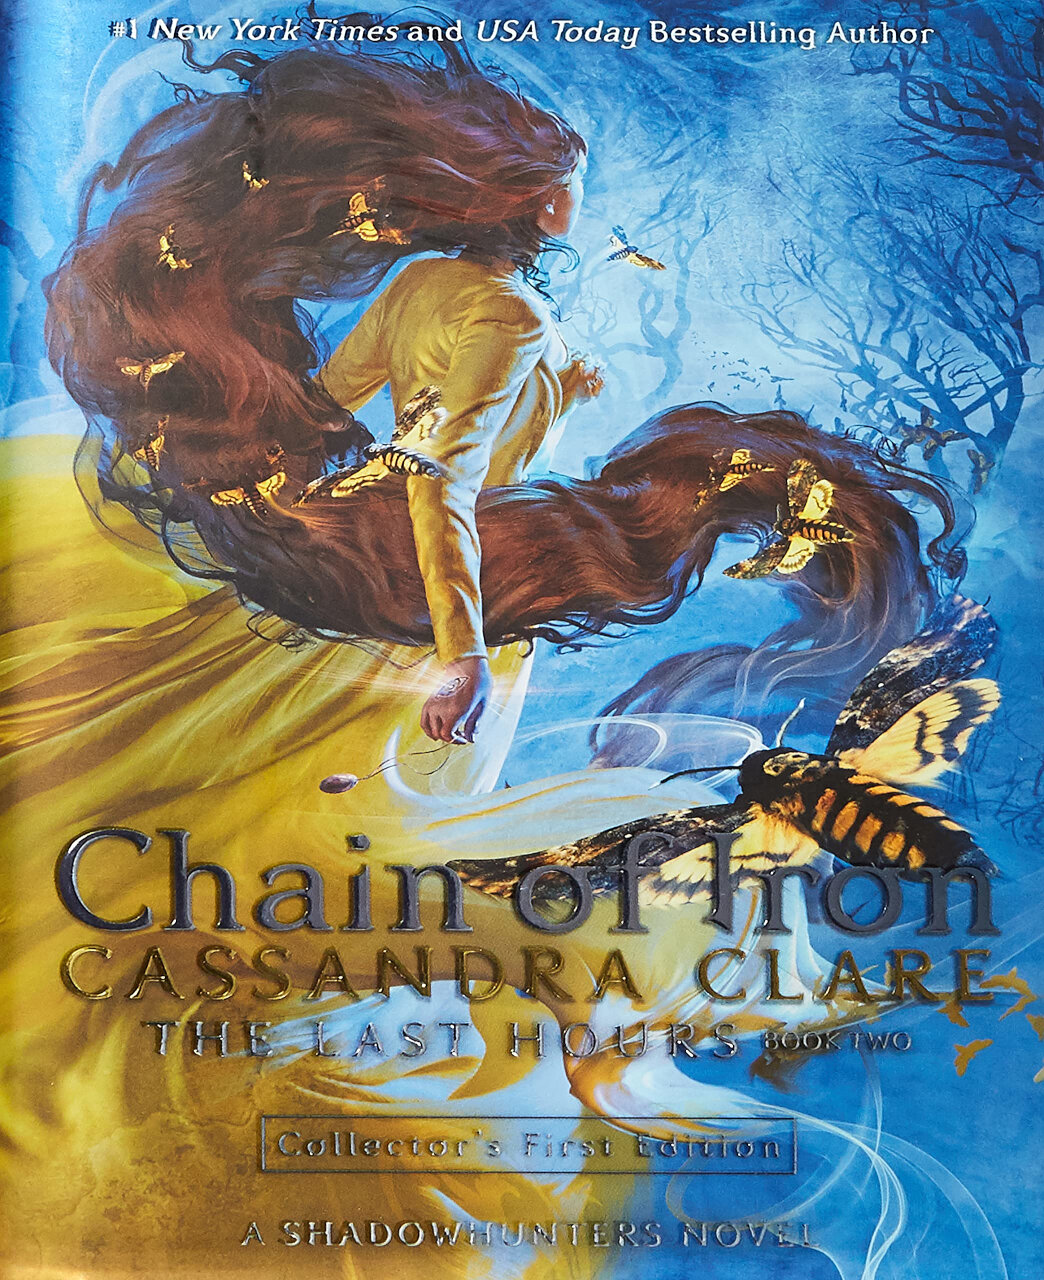 Cover of “Chain of Iron” by Cassandra Clare